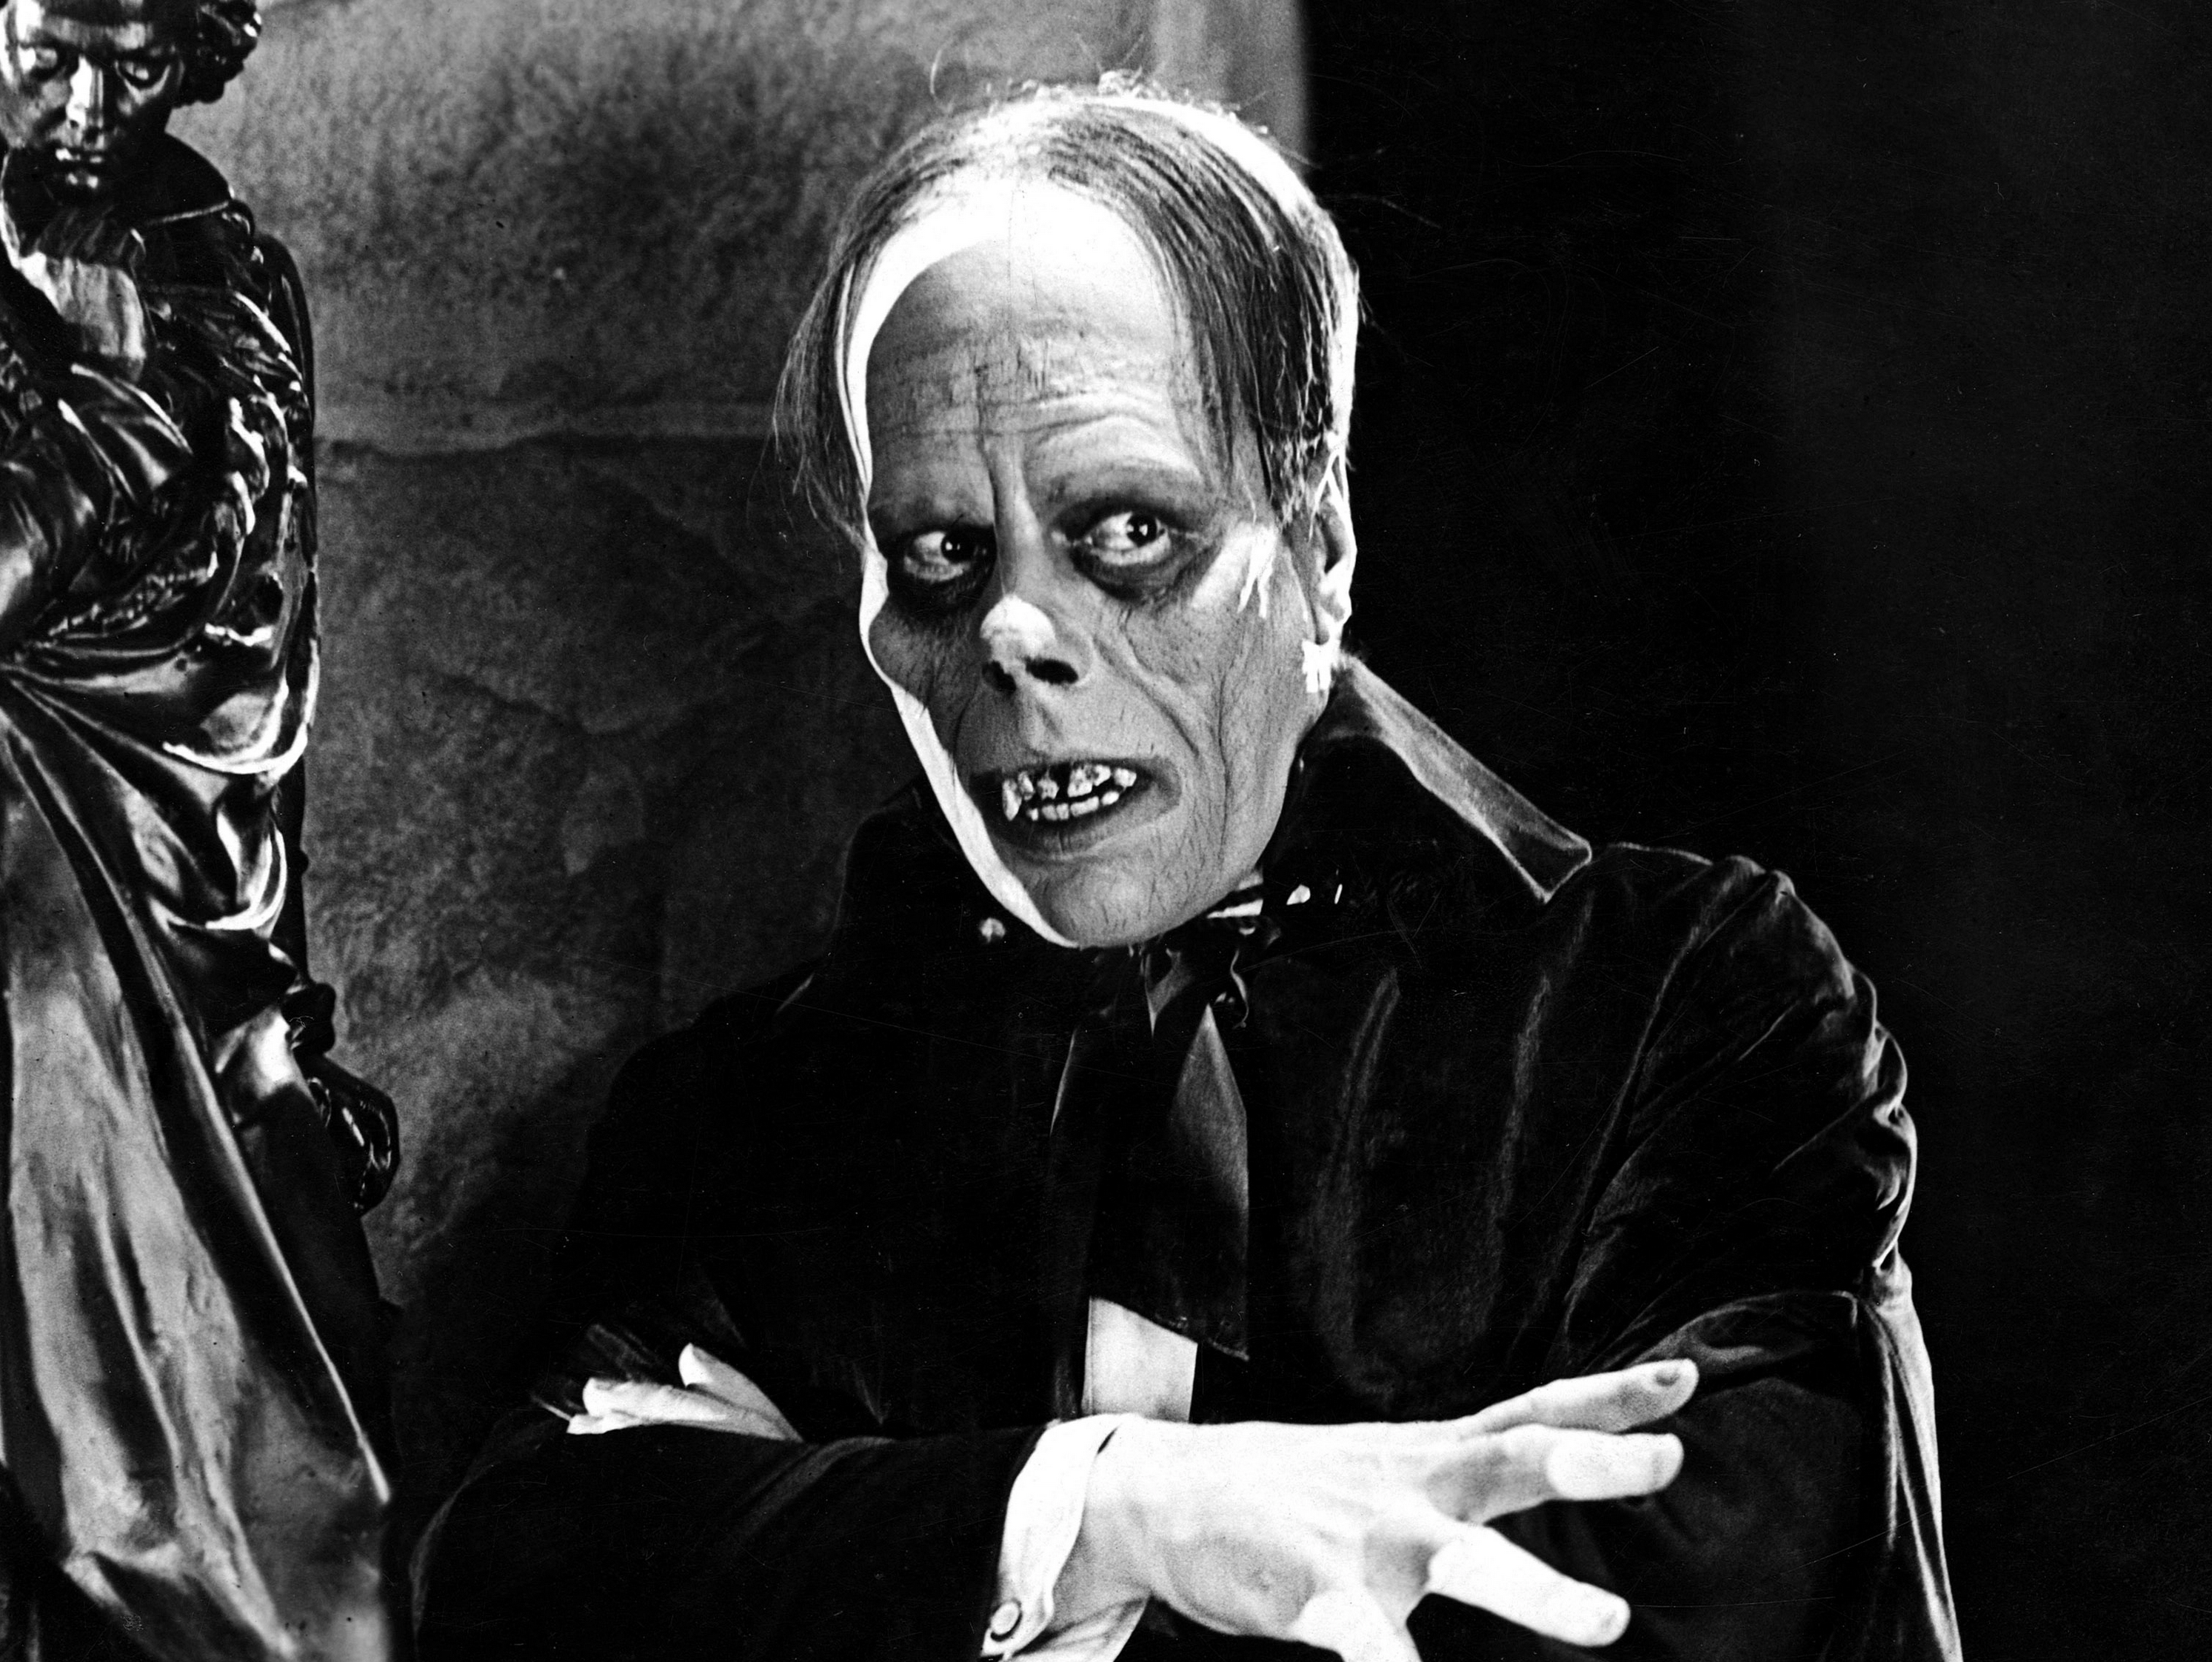 A special online presentation of the 1925 silent film The Phantom of the Opera with musical accompaniment is one of the many free-ish events happening October 30.